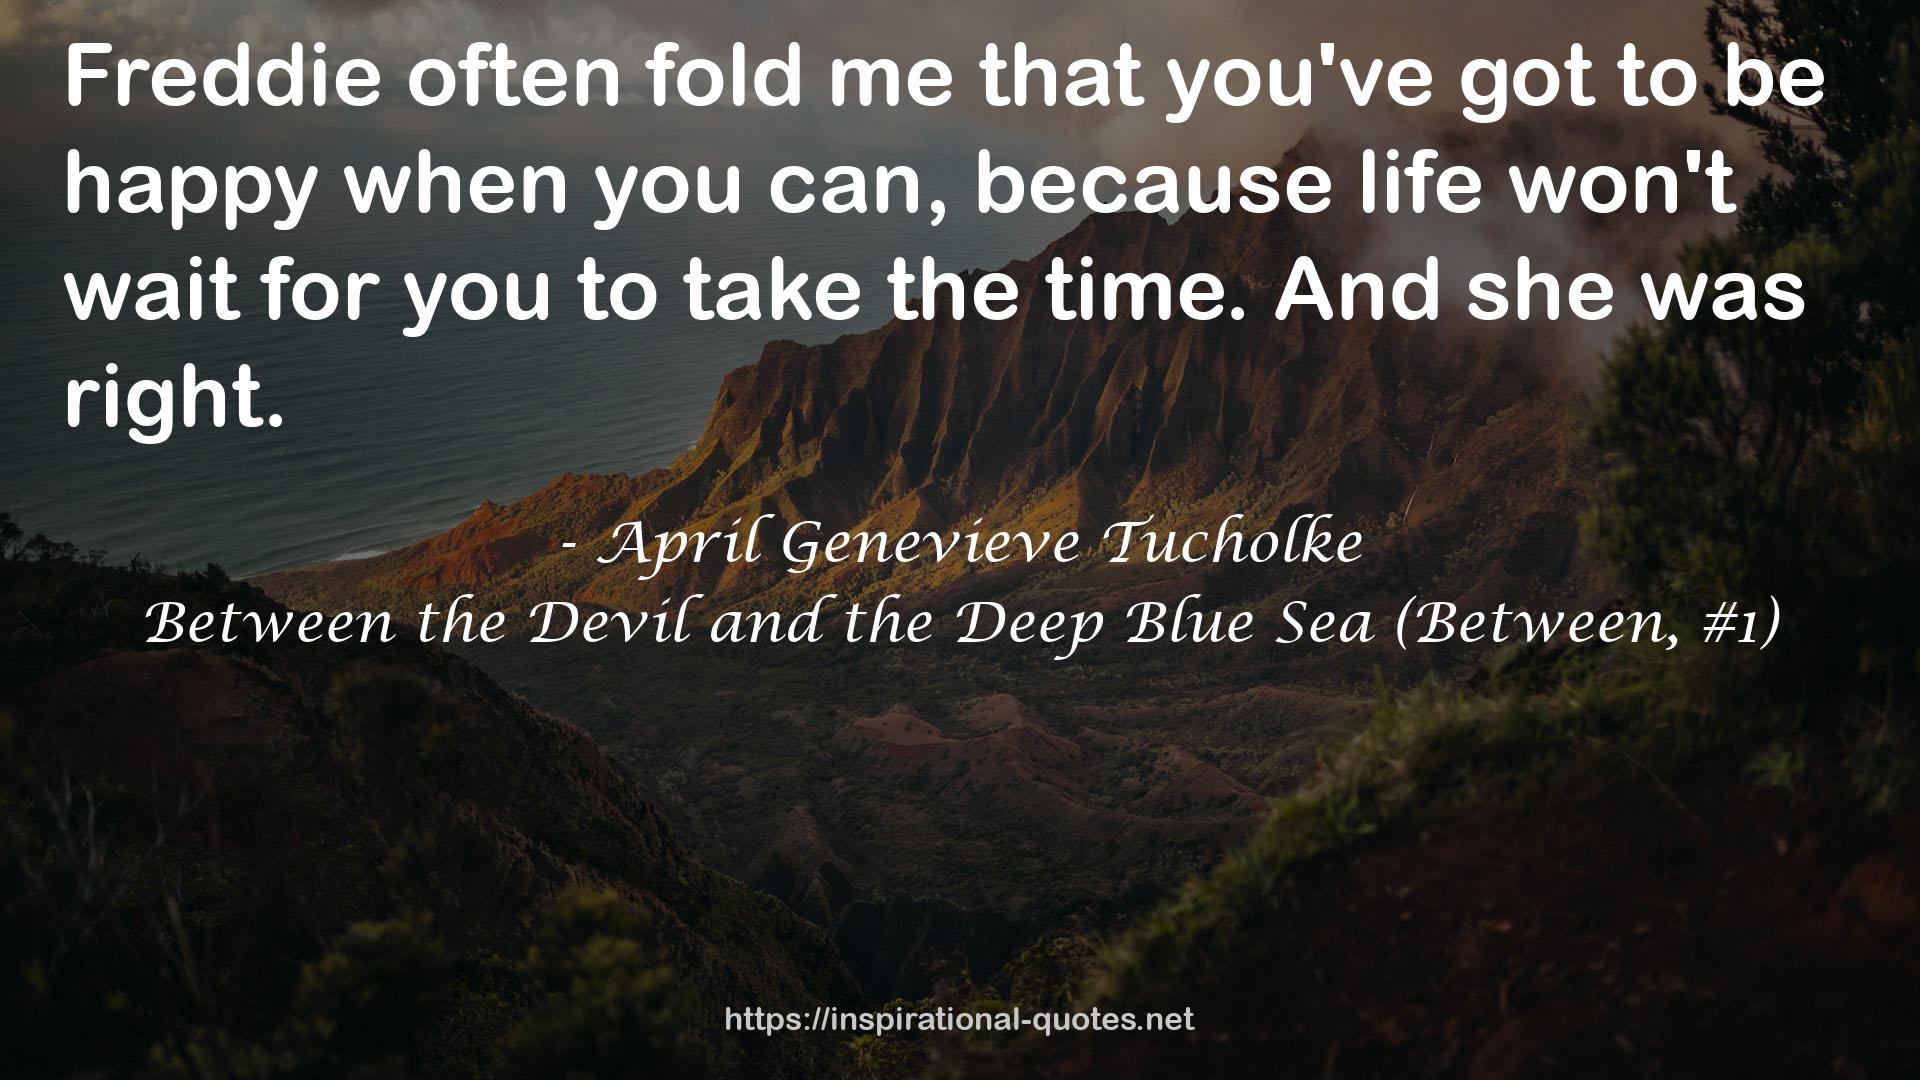 Between the Devil and the Deep Blue Sea (Between, #1) QUOTES